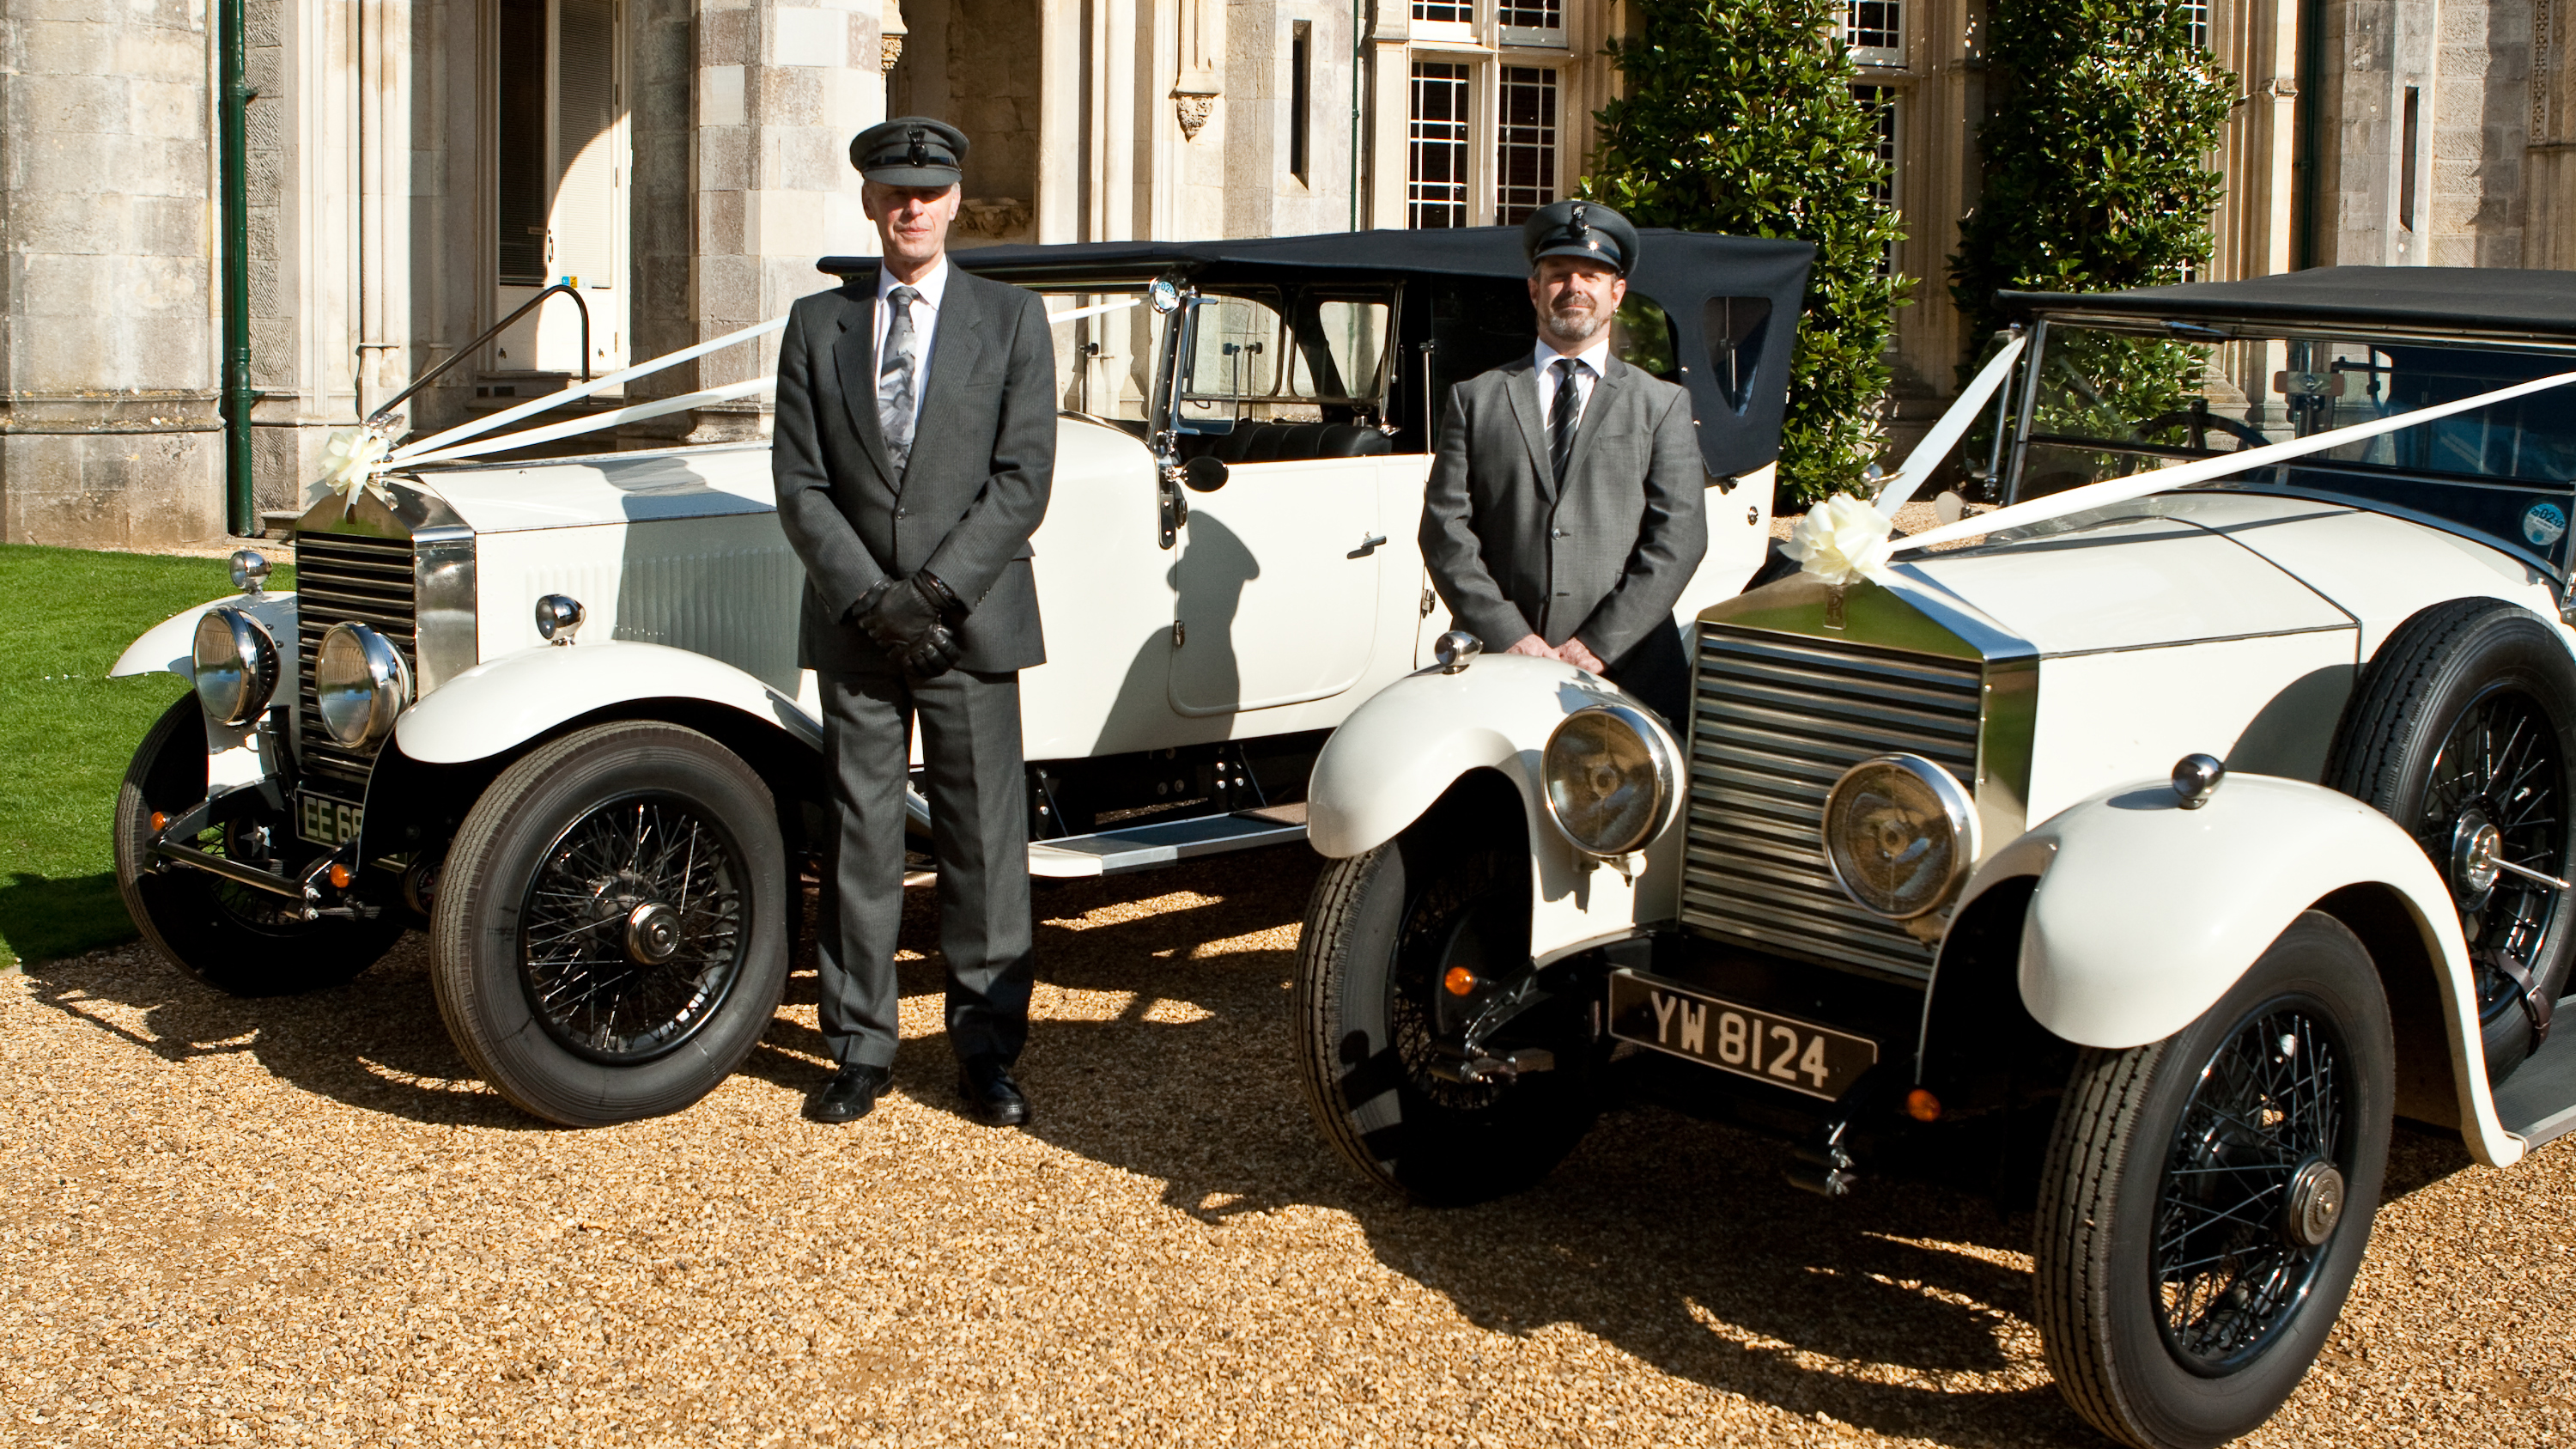 Two vintage wedding cars decorated with white ribbons and bows at a local Burton Bradstock wedding. Both vehicles are parked side-by-side with their chauffeurs next to them.